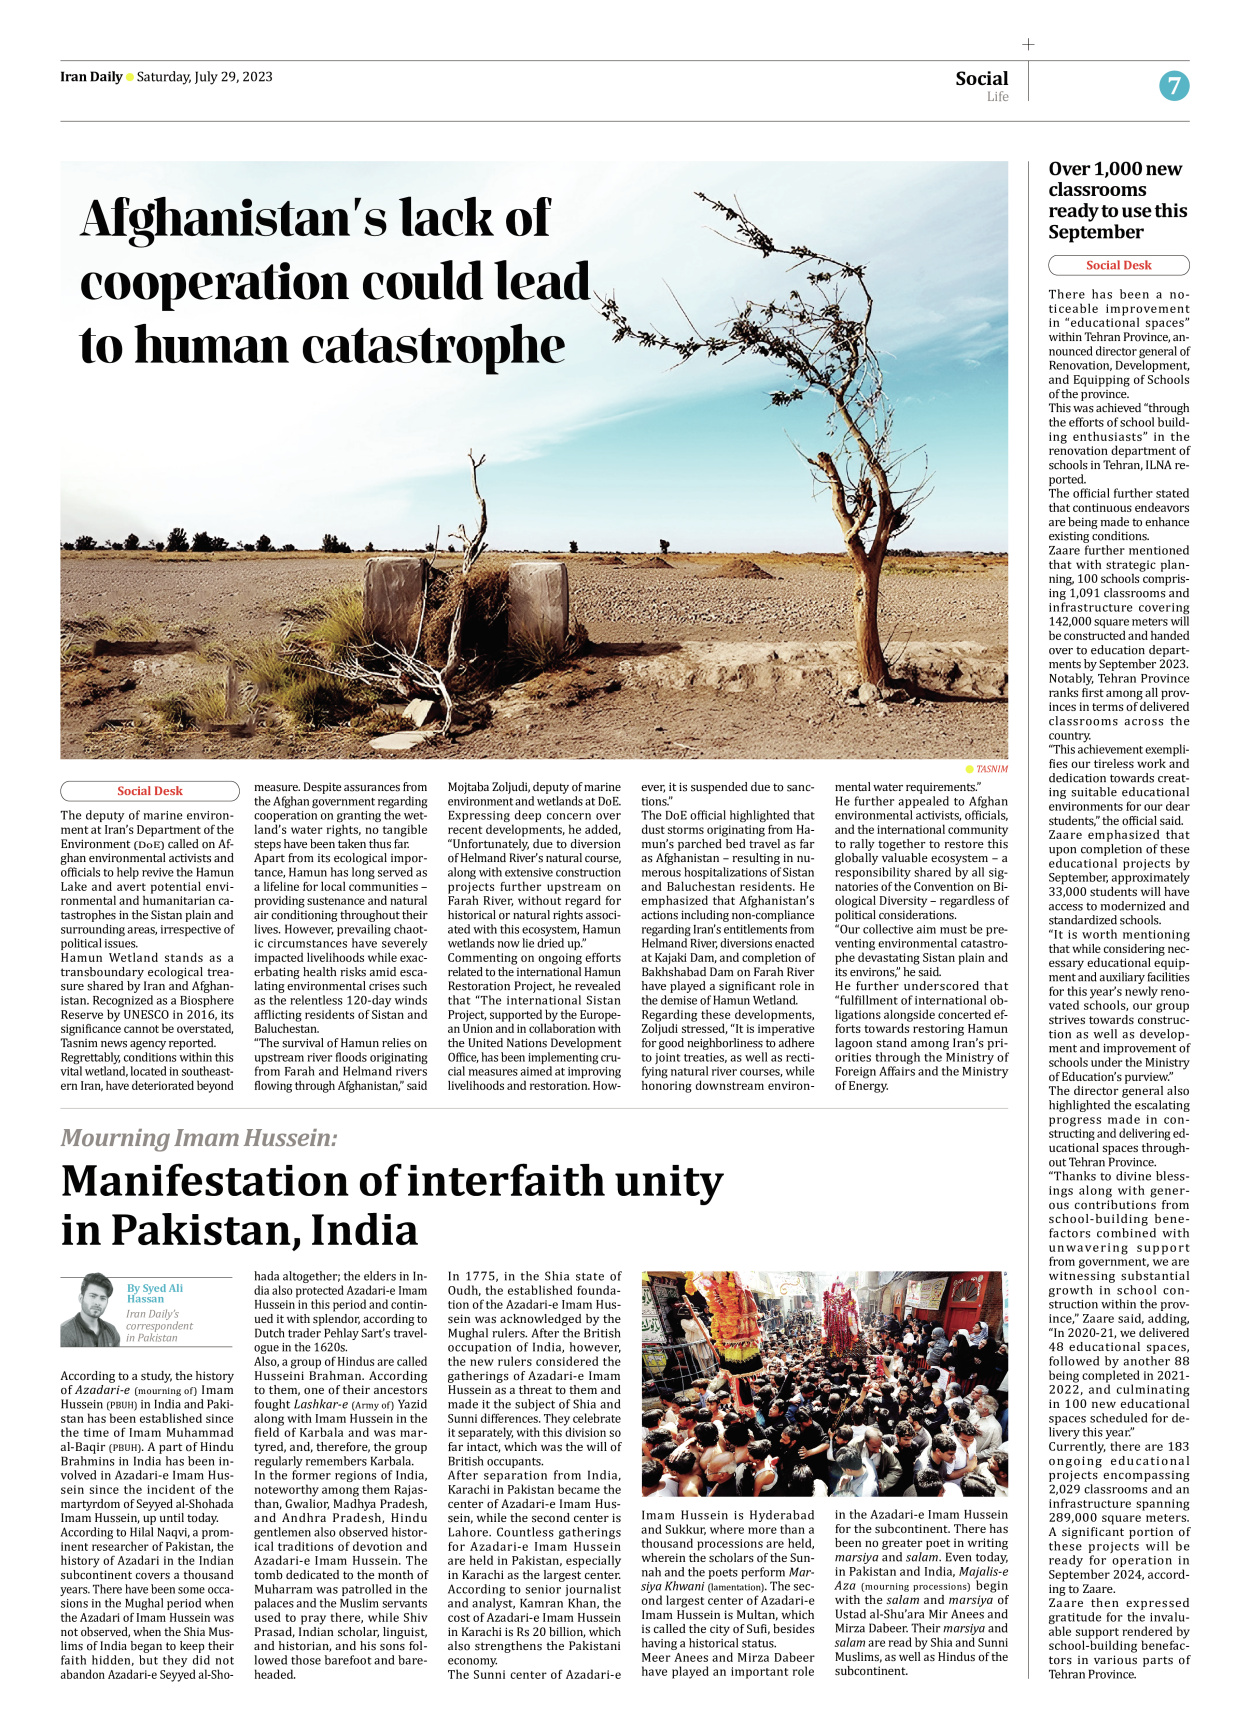 Iran Daily - Number Seven Thousand Three Hundred and Fifty - 29 July 2023 - Page 7